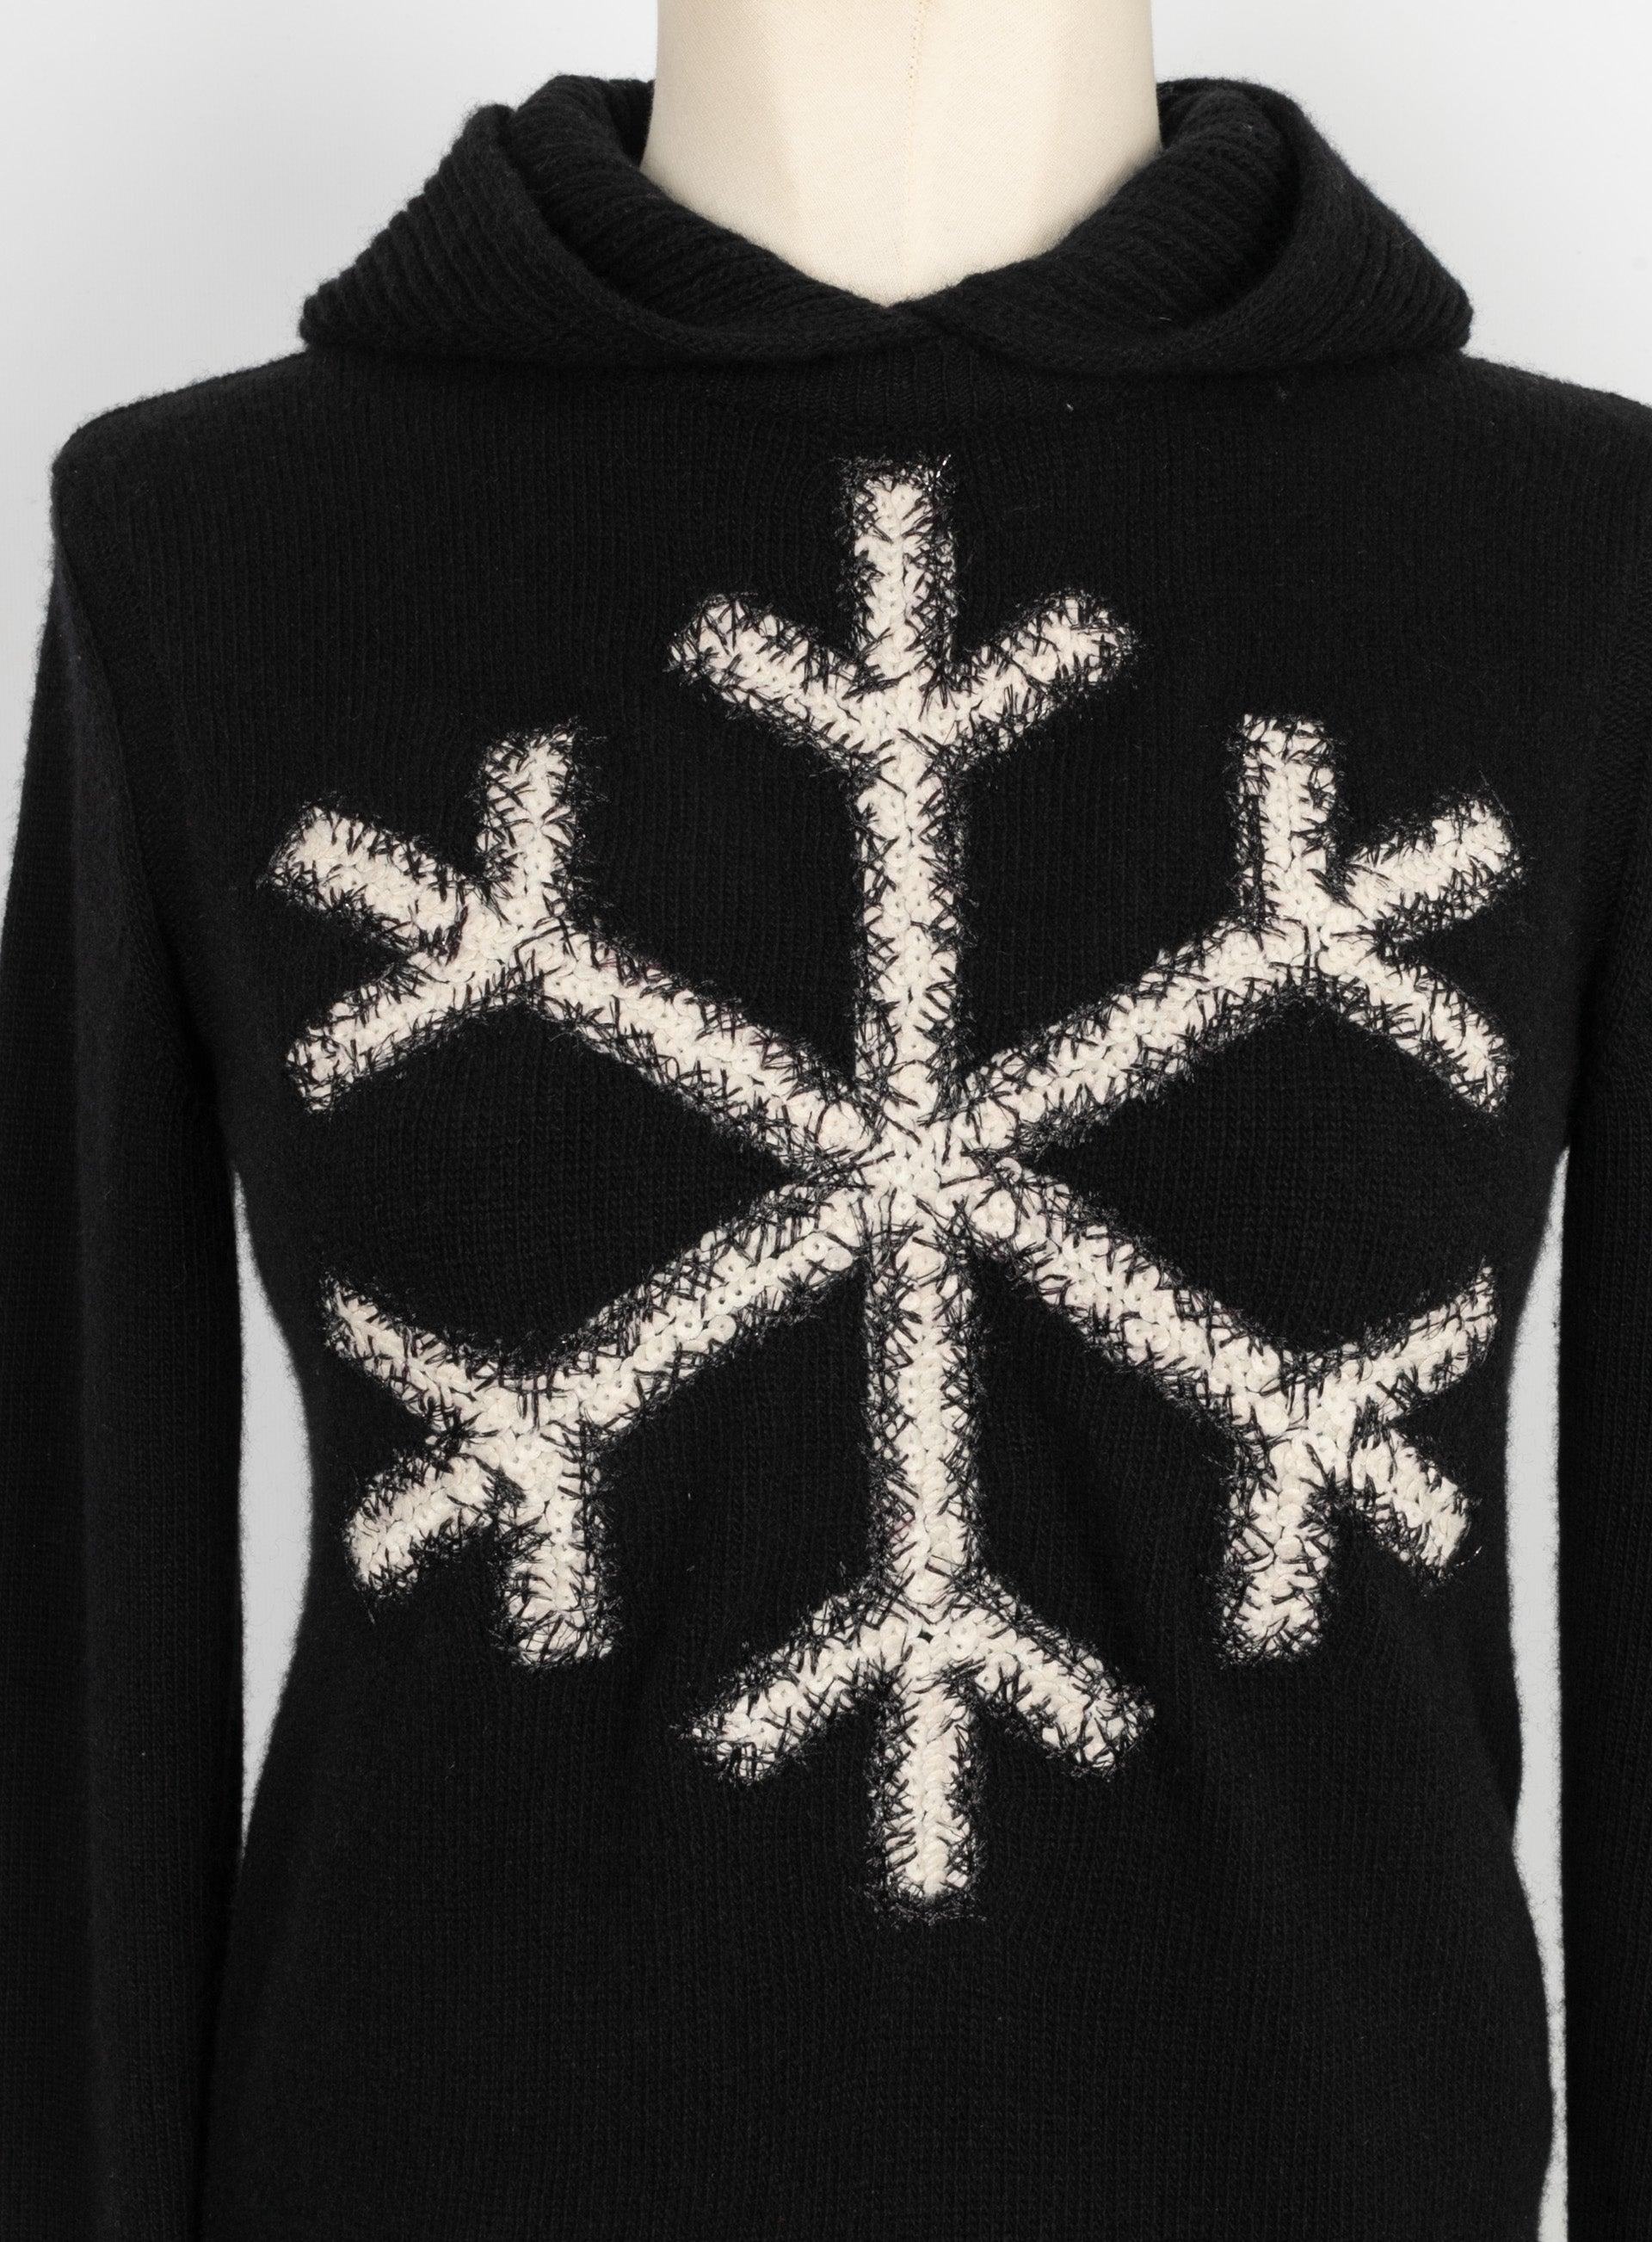 Chanel Black Wool Sweater with Snowflake Decorations 1